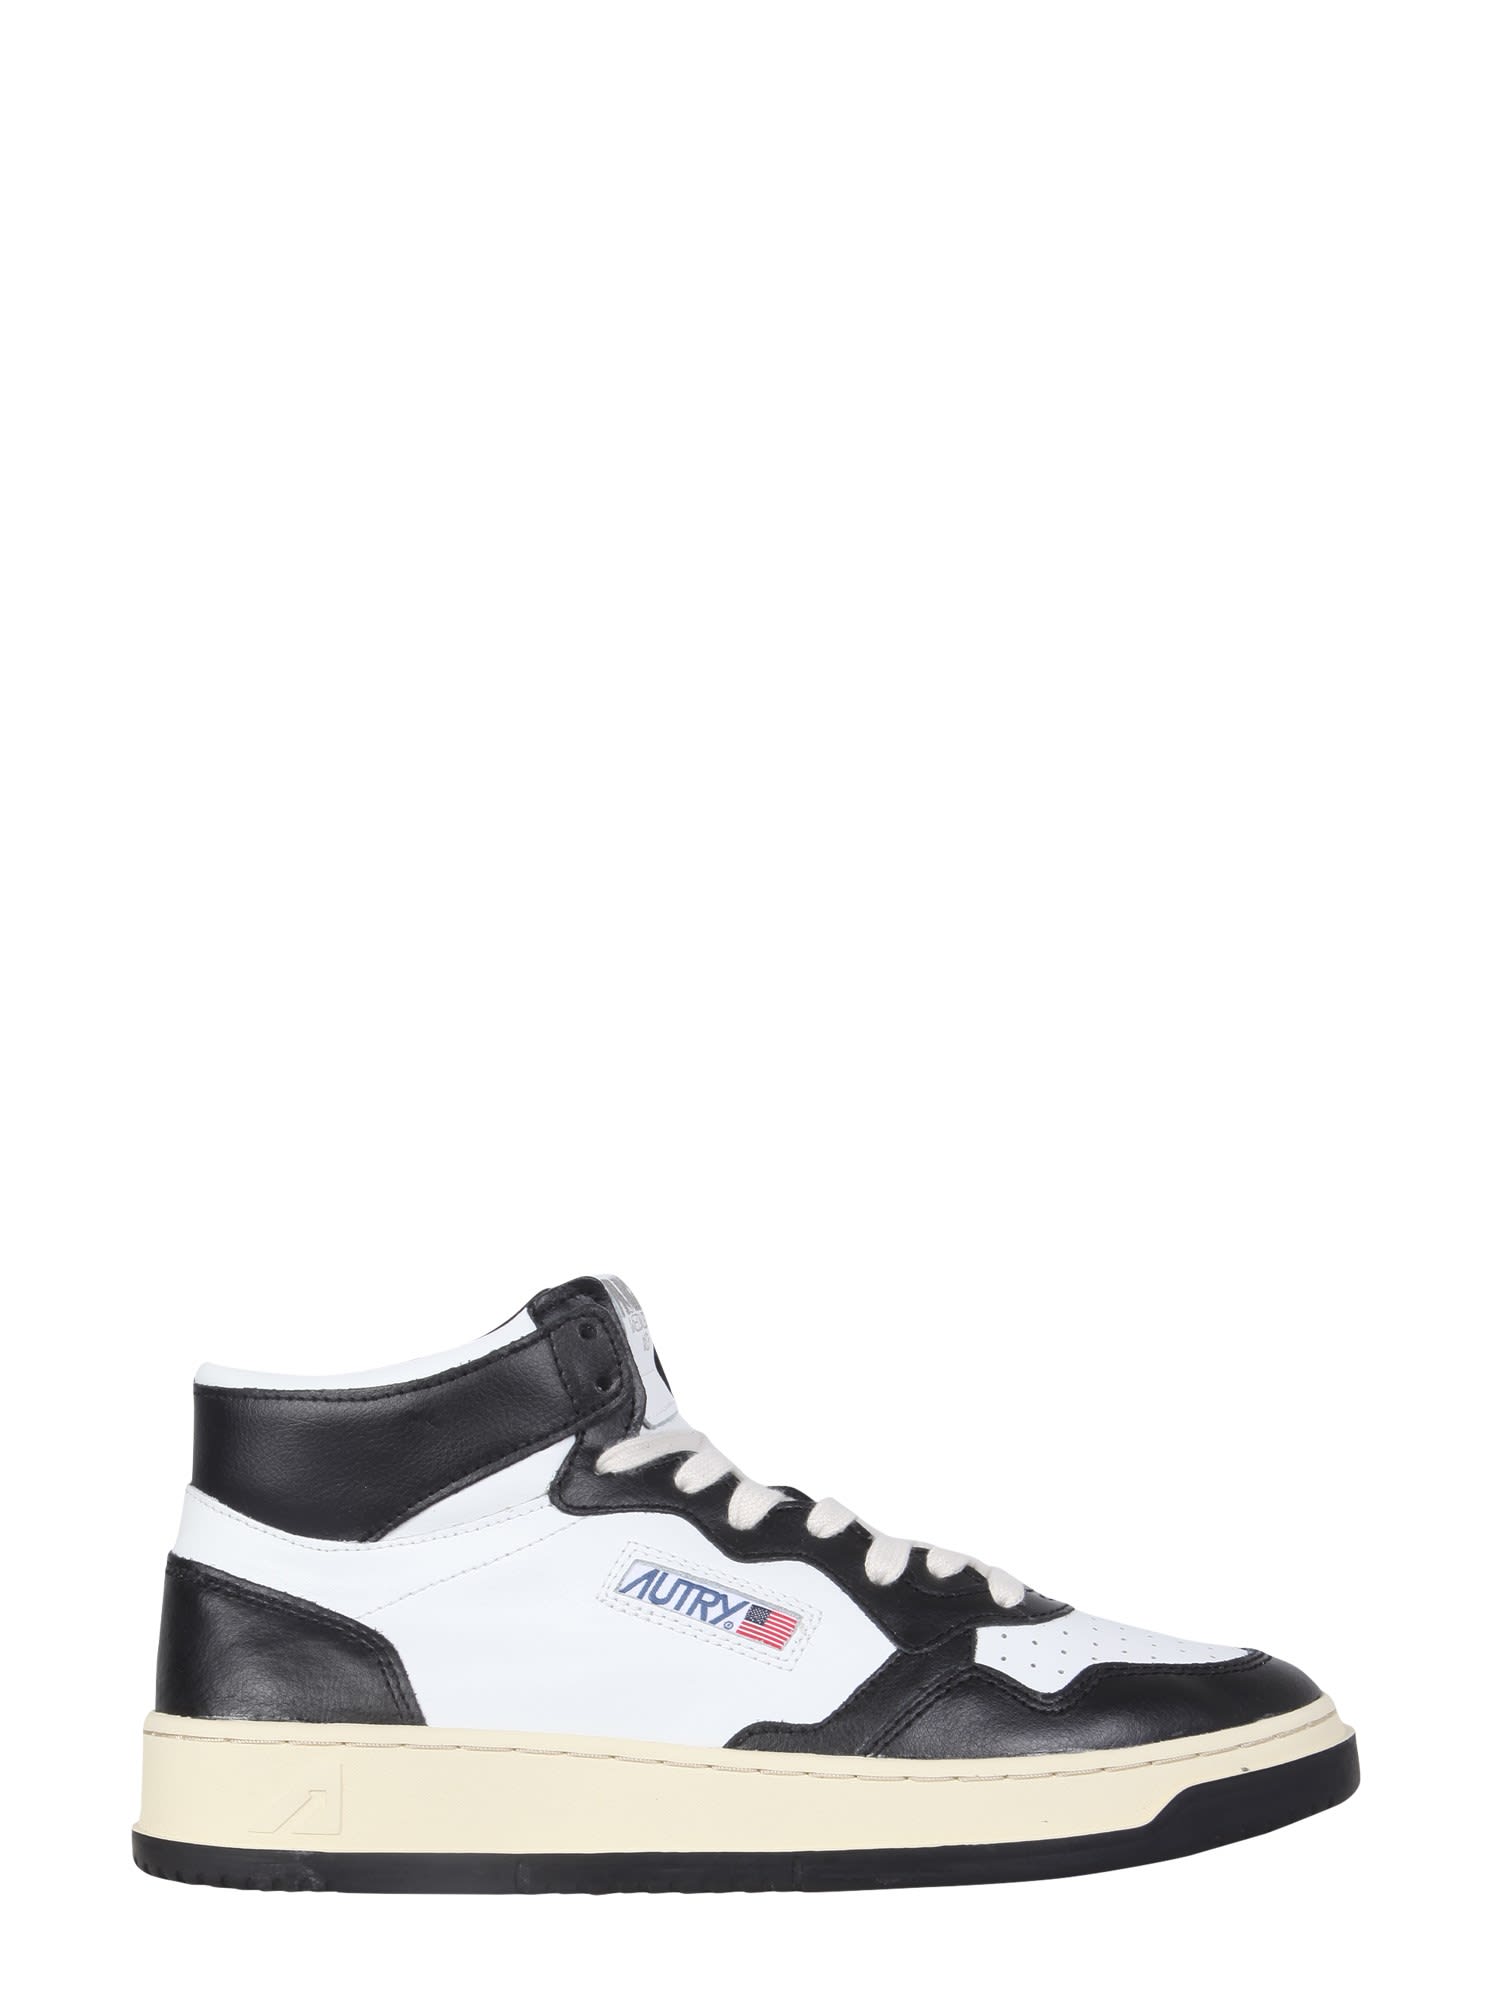 Shop Autry Medalist Mid Cut Sneakers In Black/white